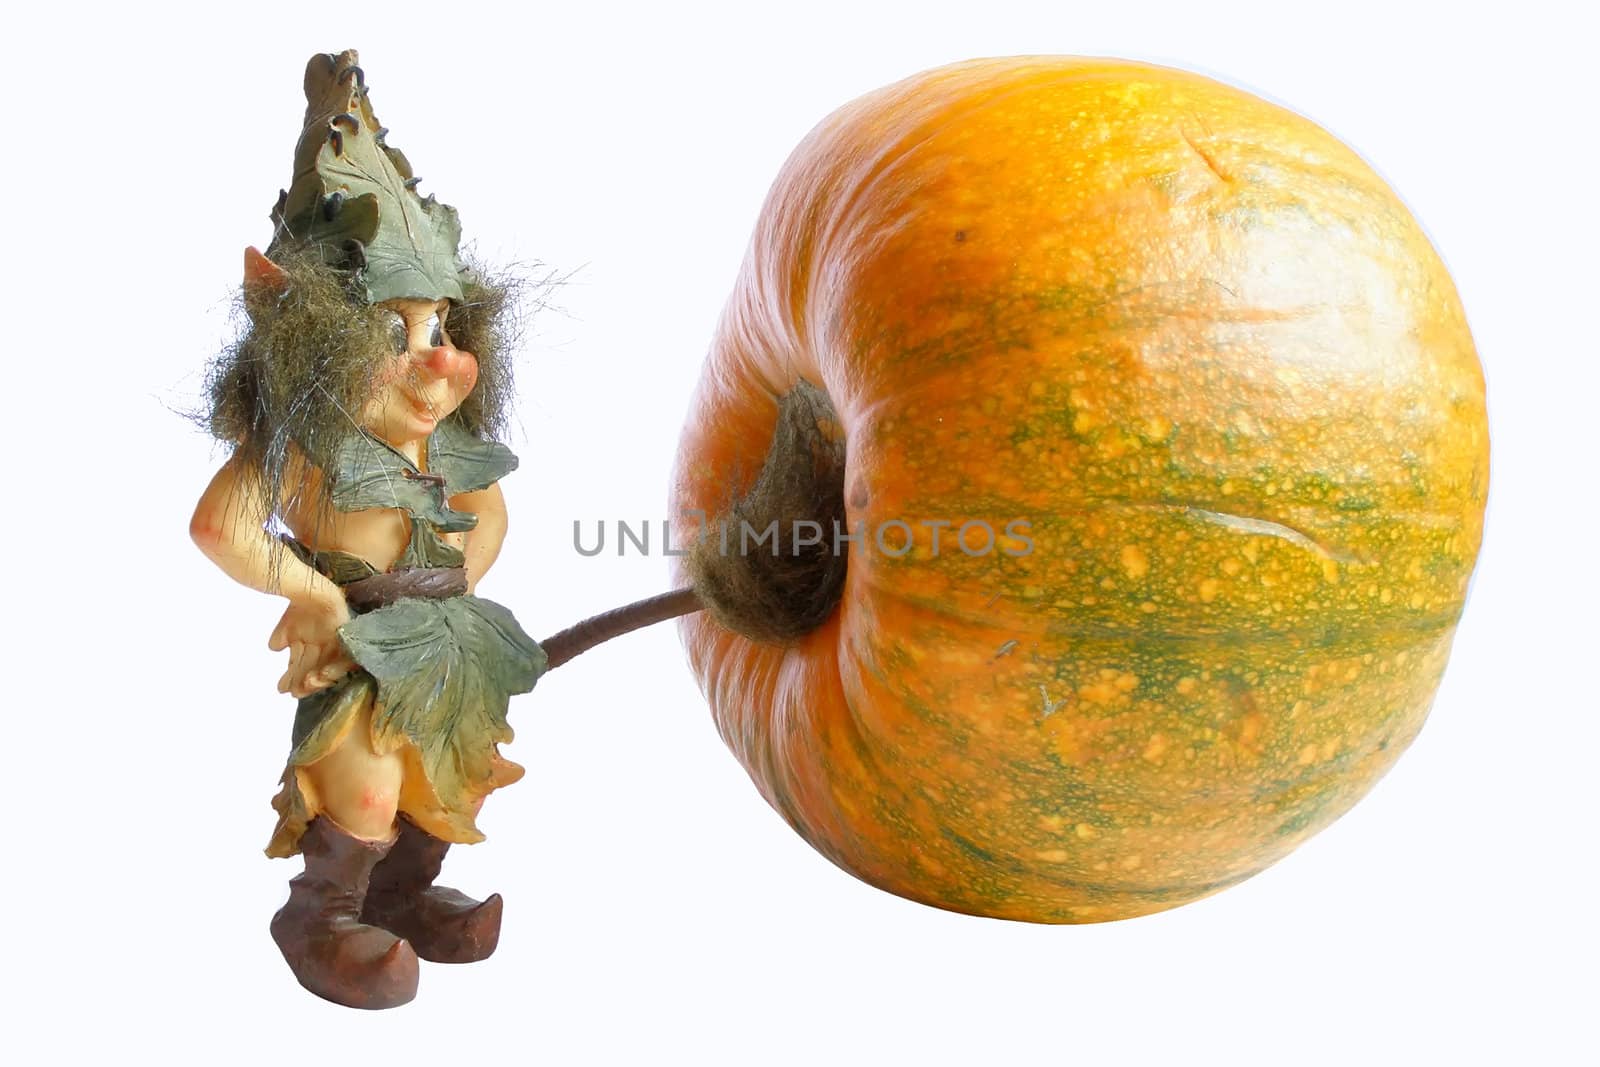 the figurine of gnome standing near the pumpkin  